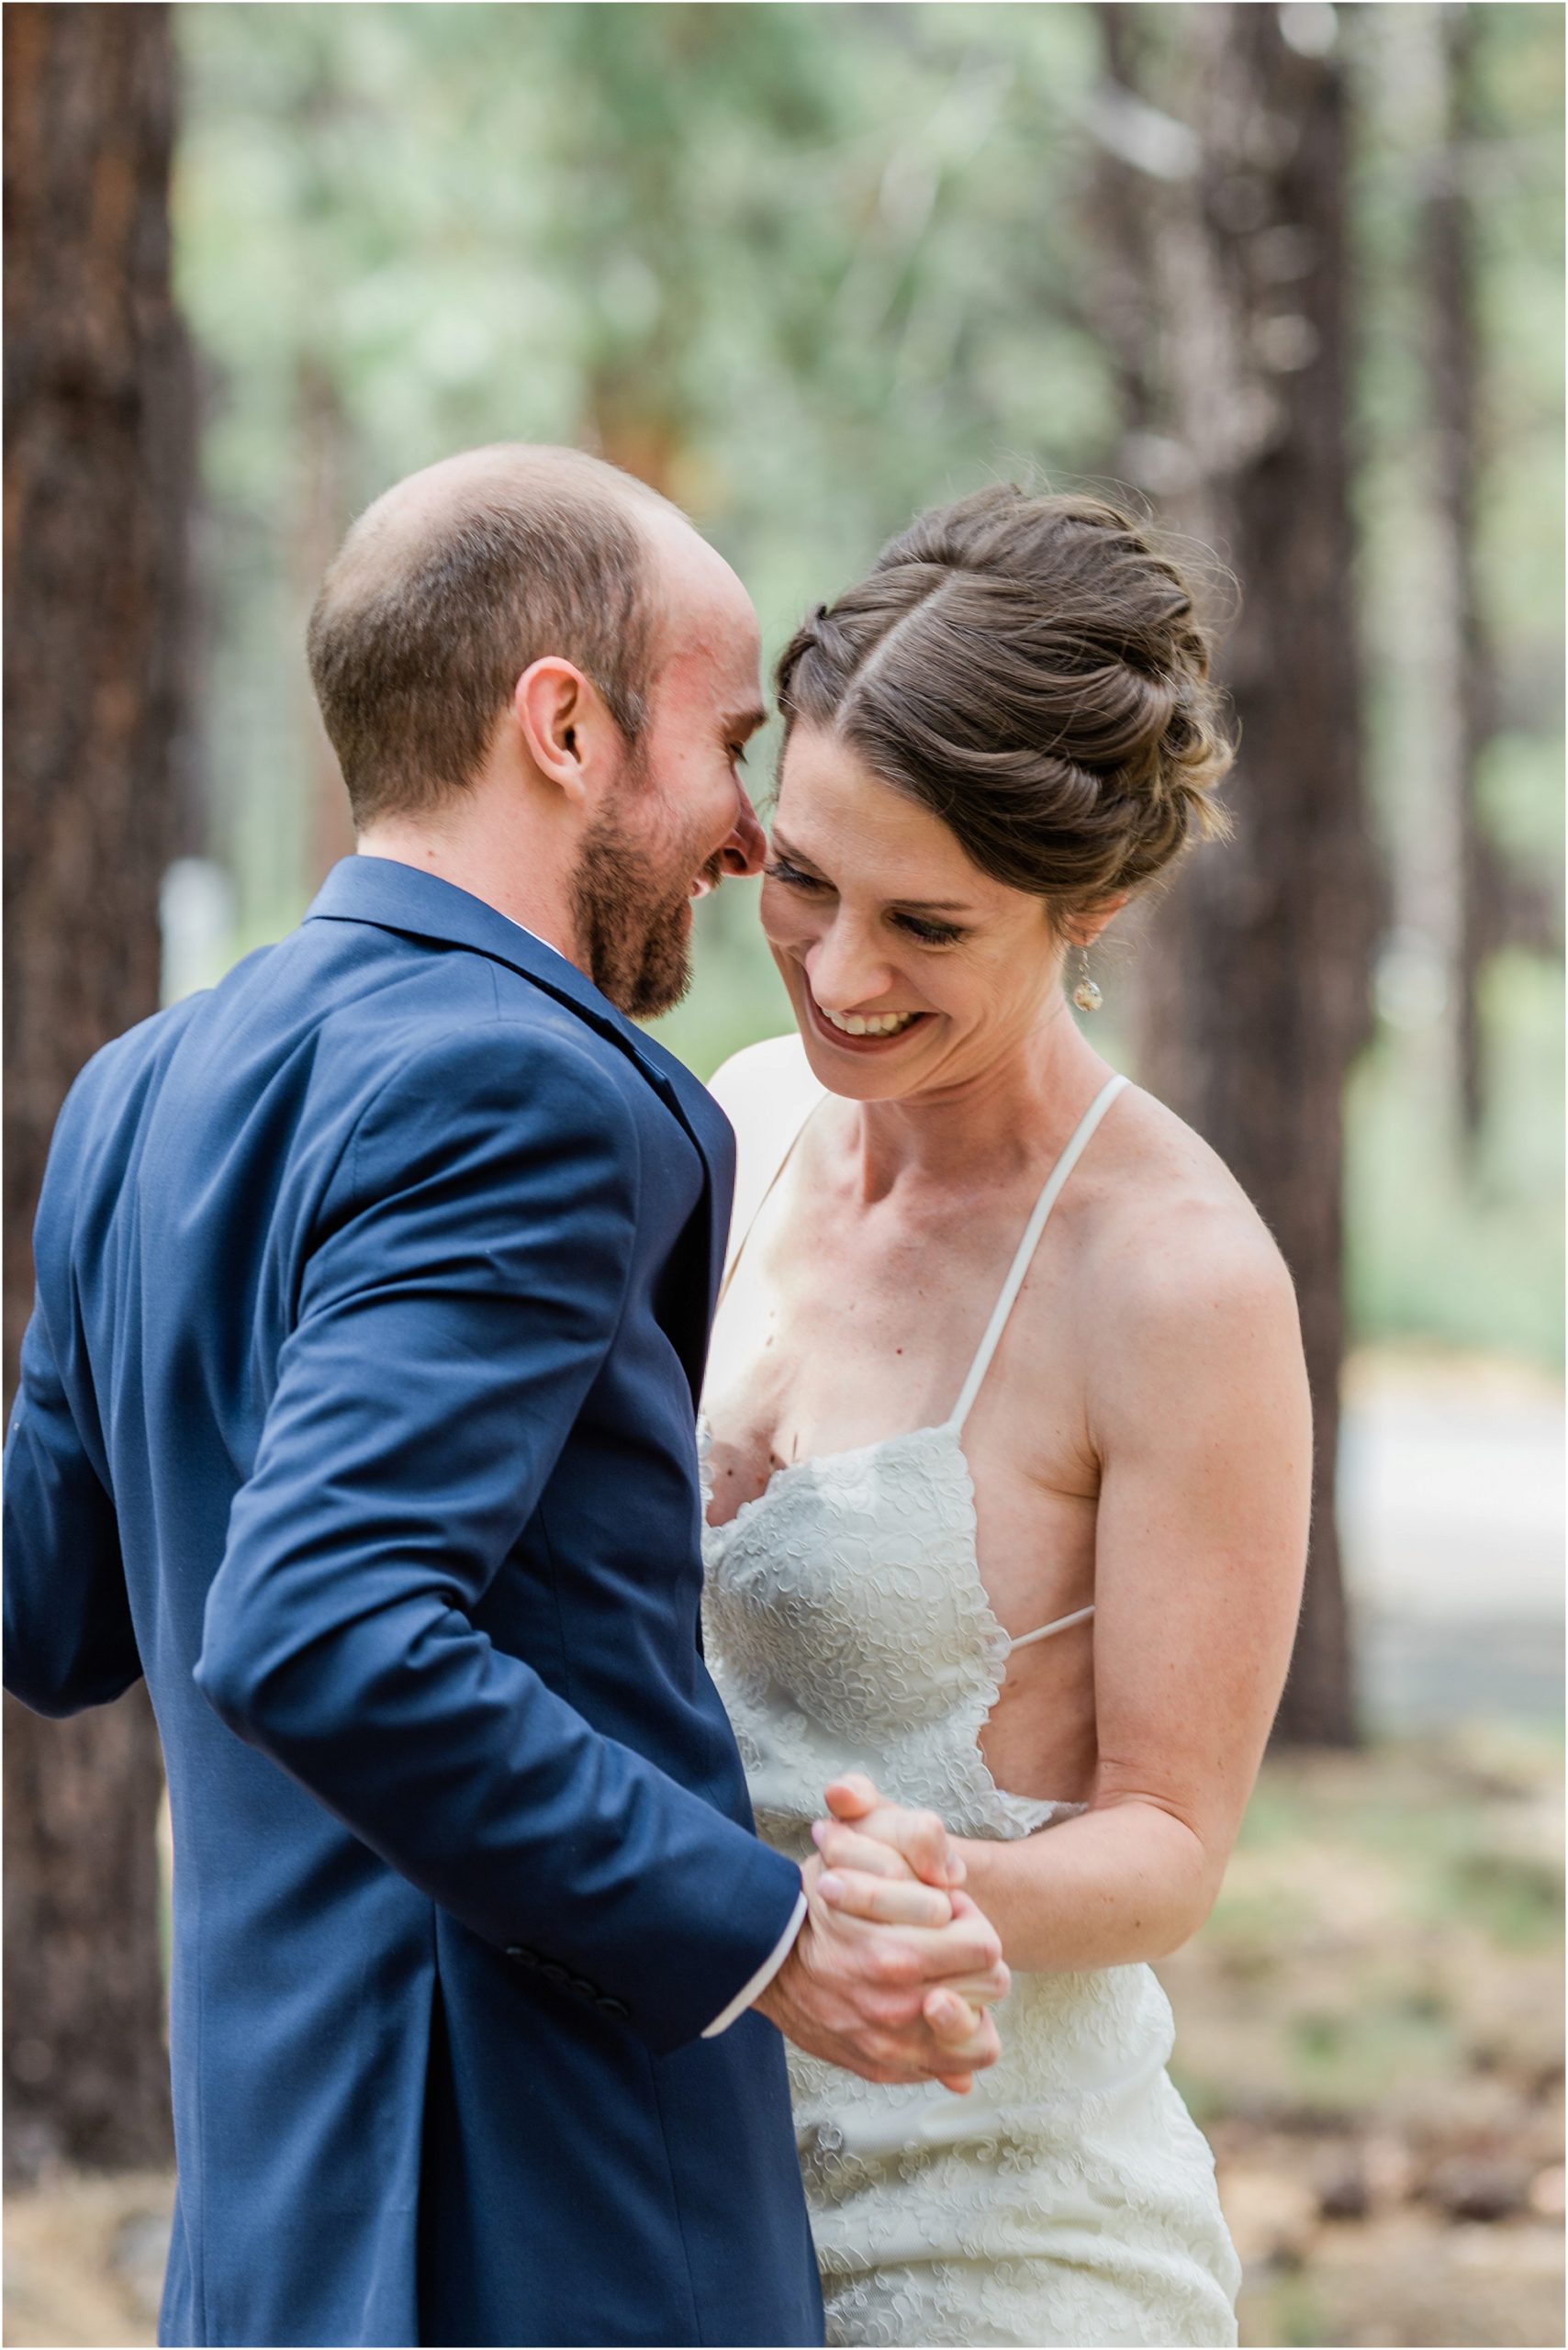 A groom wearing a cobalt blue suit and a bride in a strappy BHLDN gown share a laugh during their first look at the High Desert Museum wedding venue in Bend, Oregon. | Erica Swantek Photography